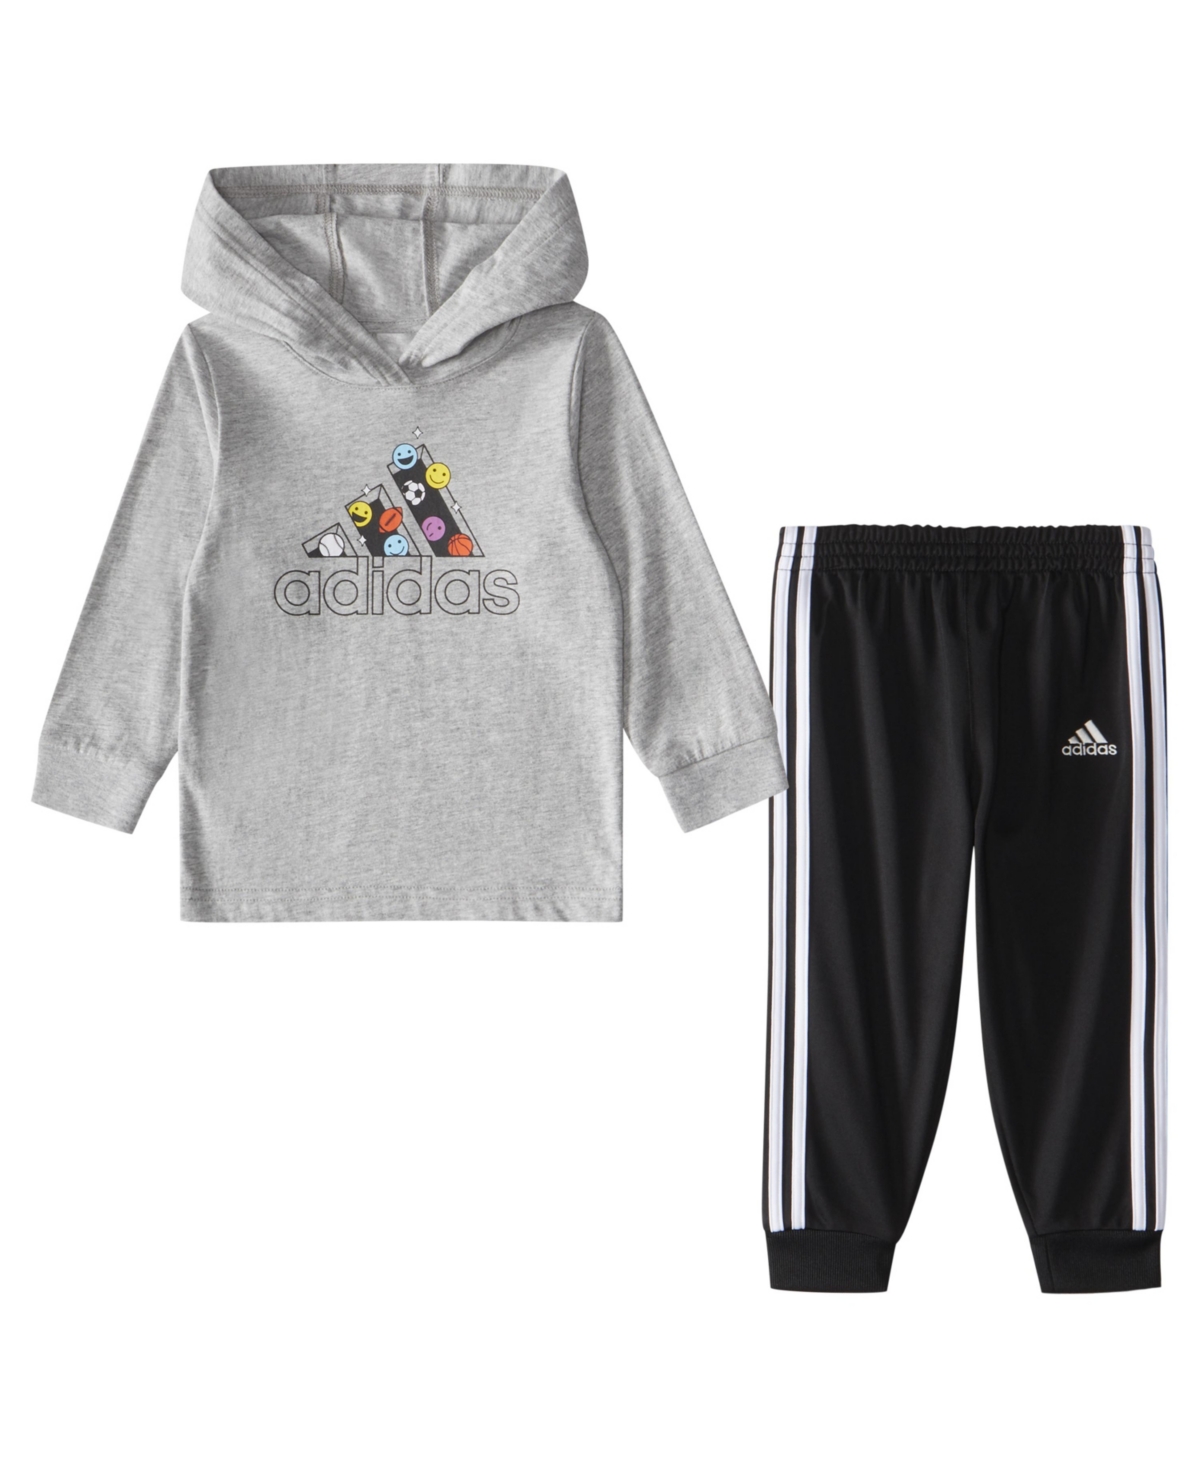 adidas Baby Boys Long Sleeve Hooded T-shirt and Joggers, 2 Piece Set